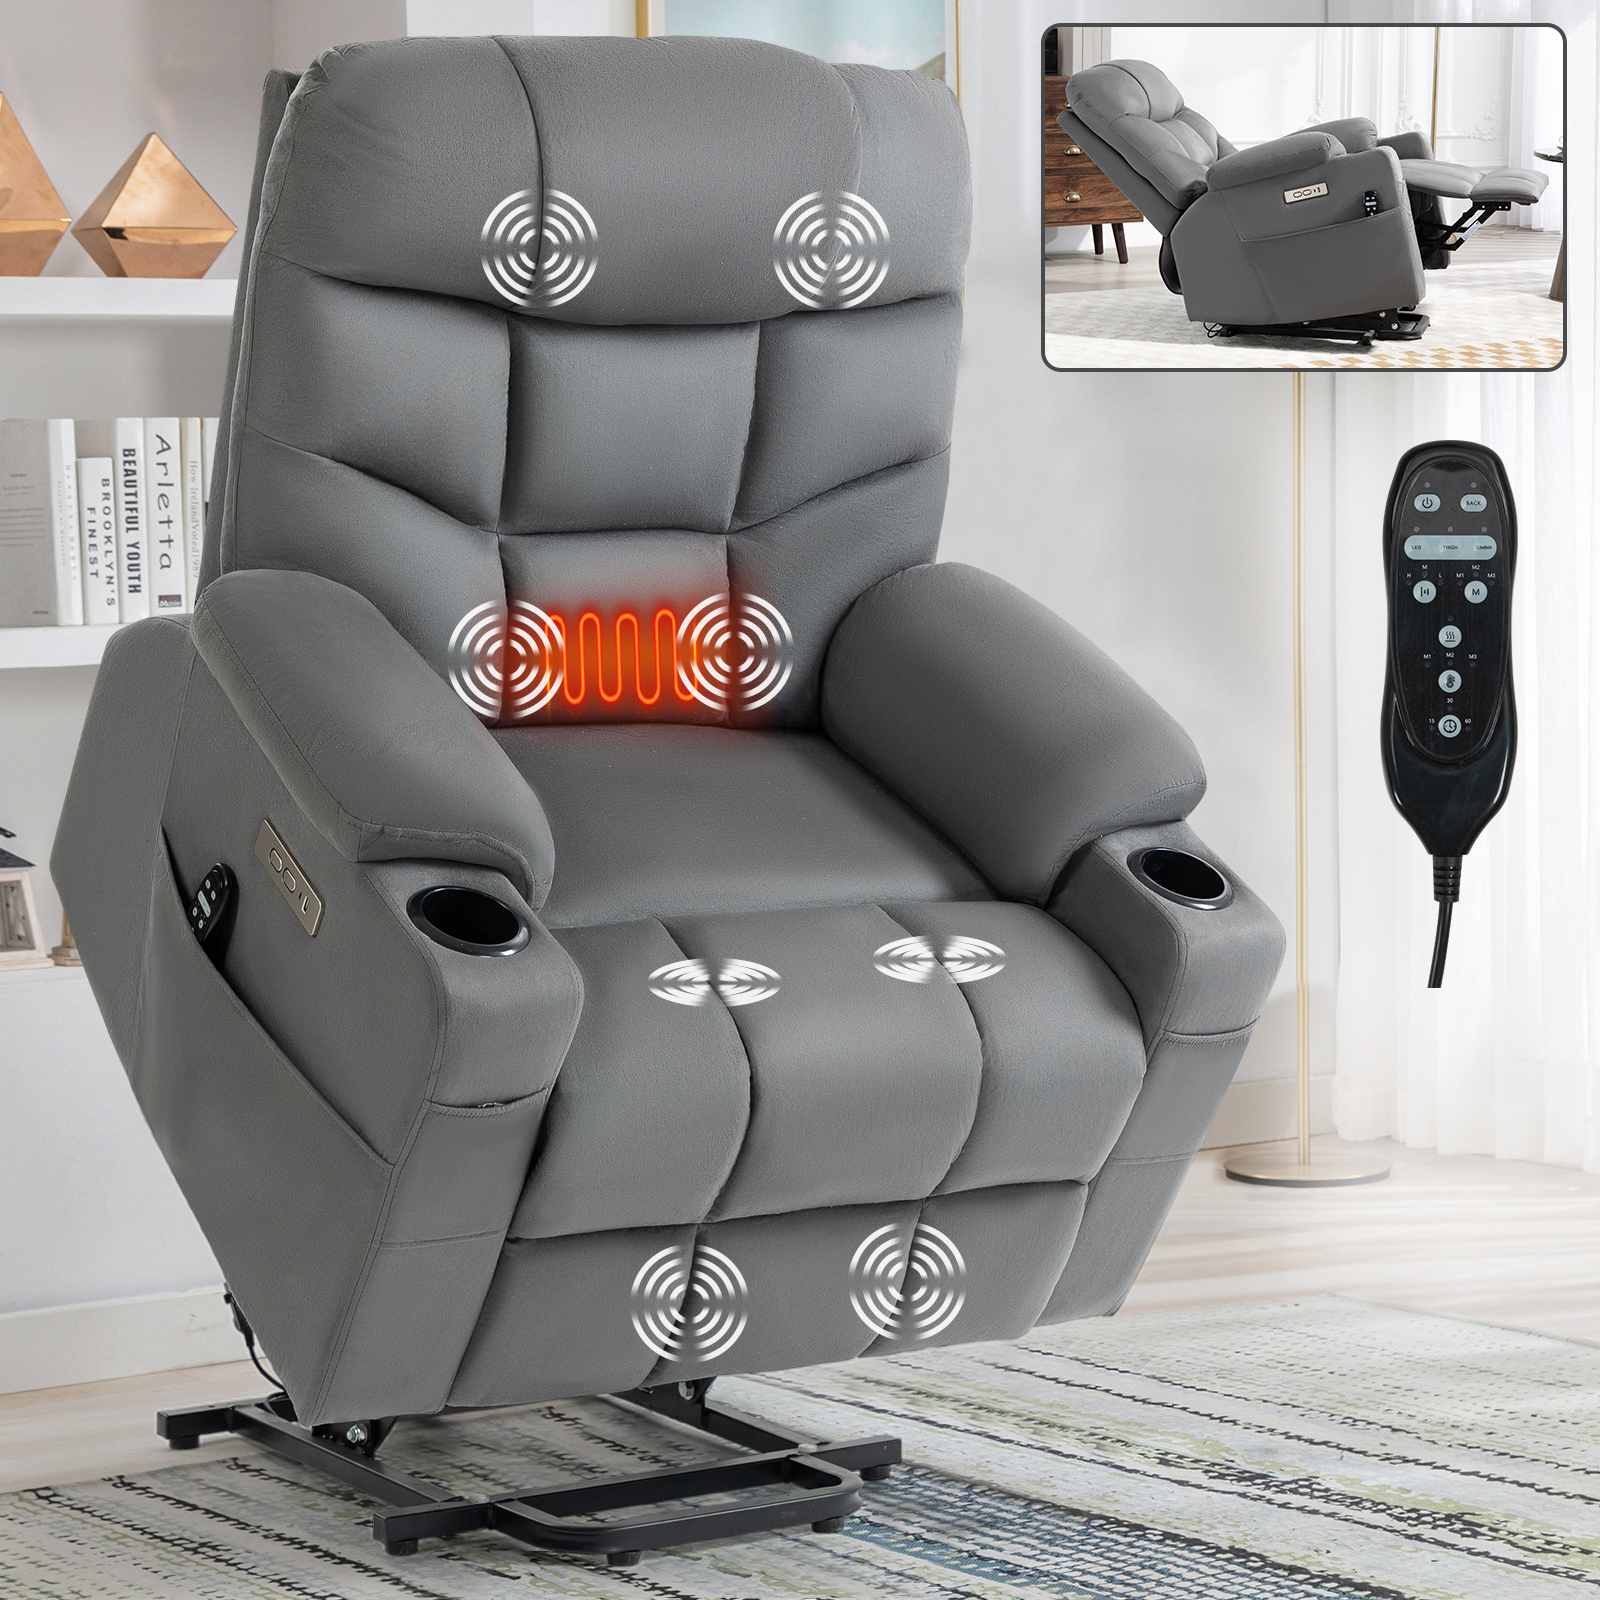 Mason light gray Suede Power Lift Recliner with Massage and Heating, USB Charge Ports and Cup Holder